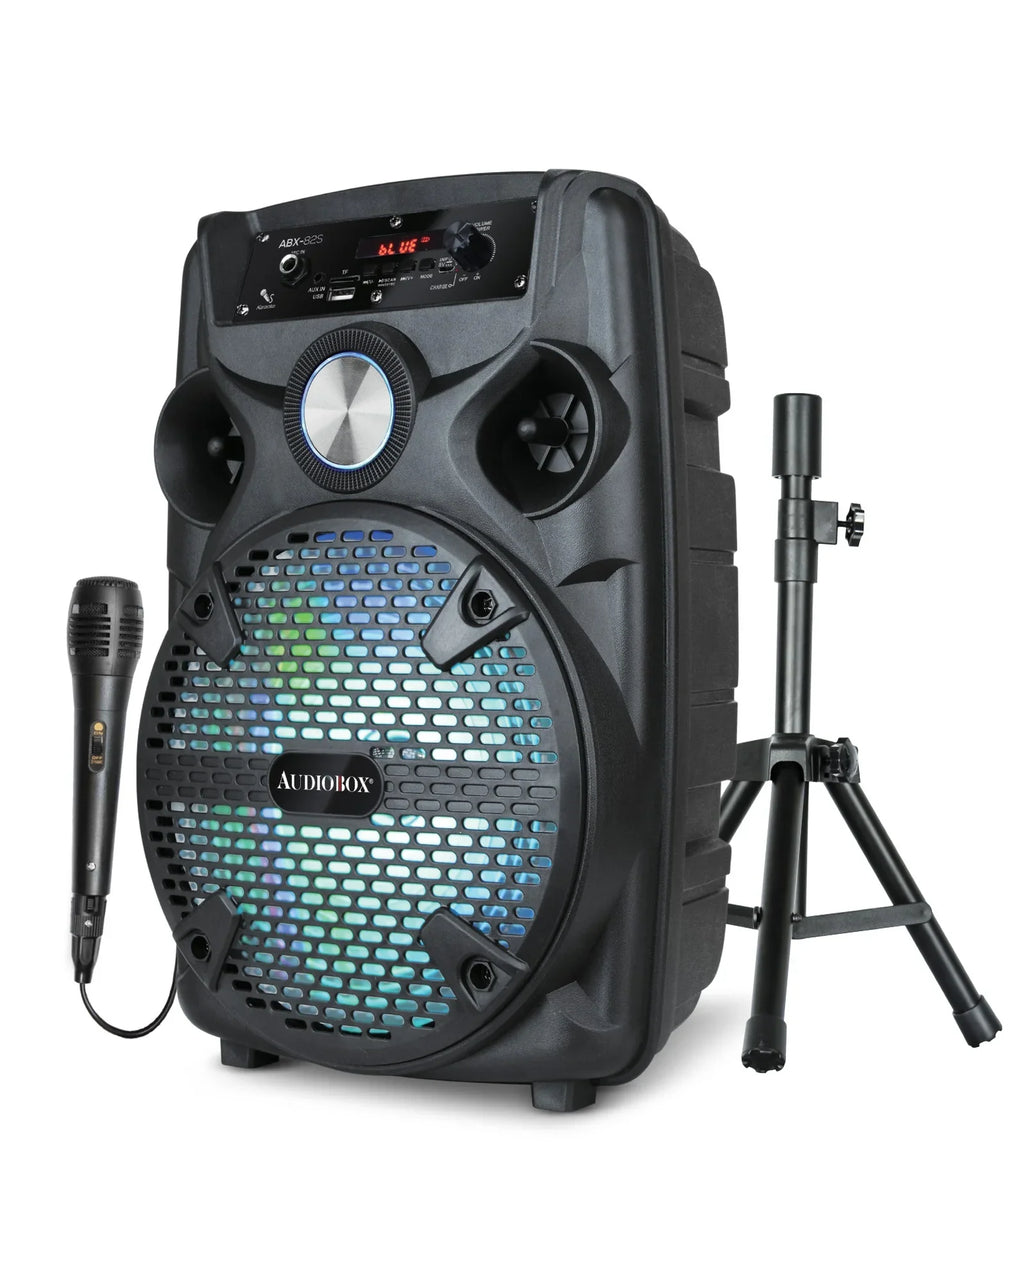 ABX-82S Audiobox 8 inch Portable Bluetooth PA Speaker with Tripod & Mic